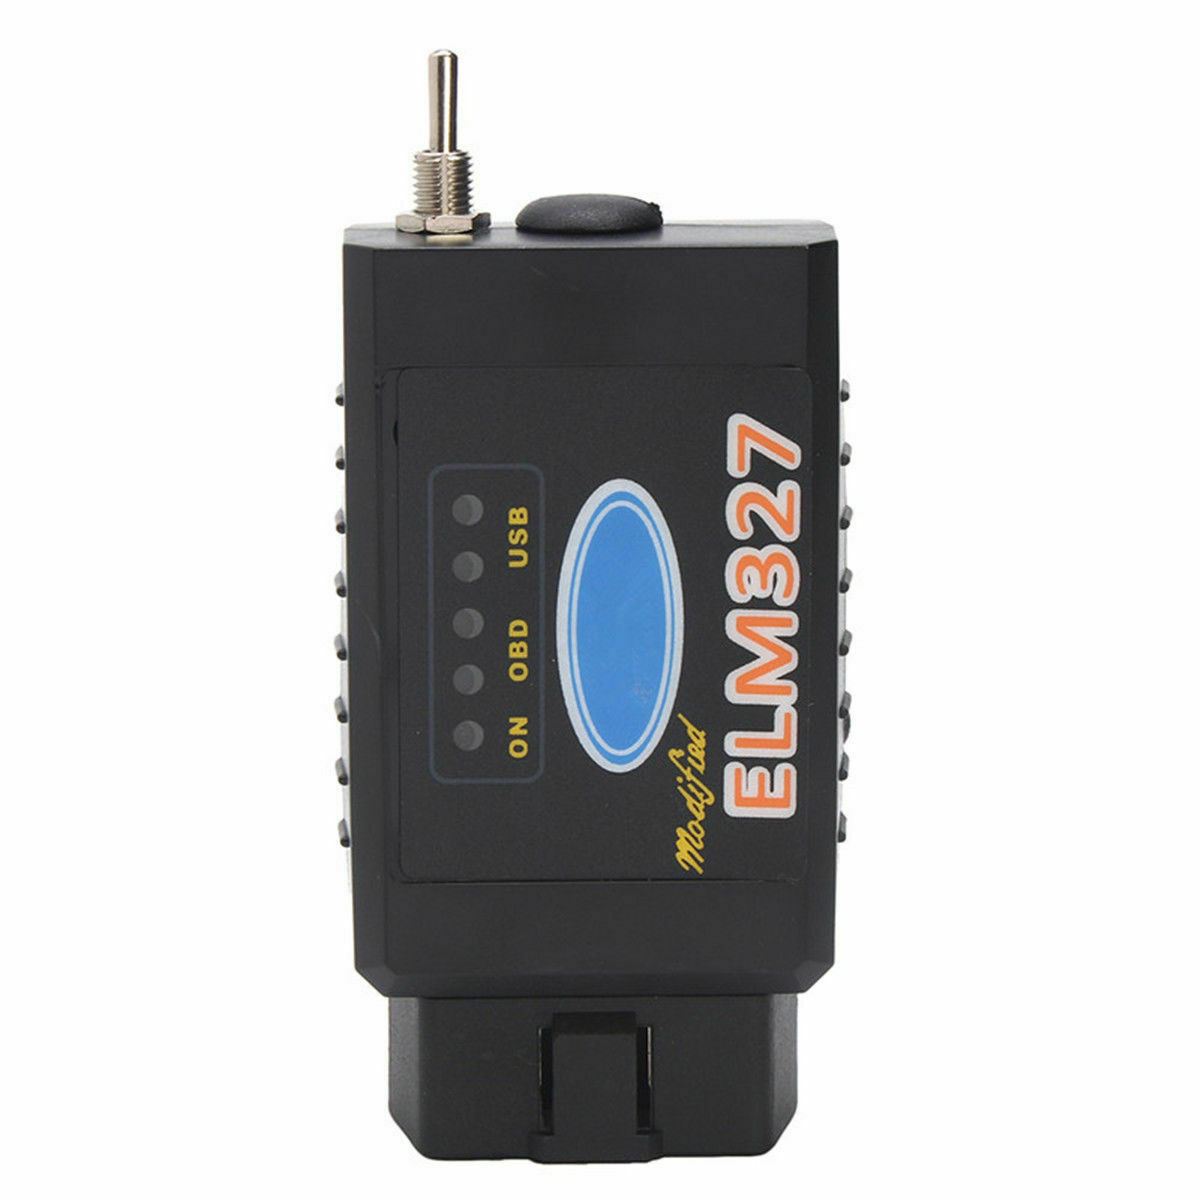 ELM327 FORScan Toggle Switch Free Update HS/MS CAN for Mazda Ford Lincoln  Mercury Hidden Function Programming PIC18F25K80 HS CAN